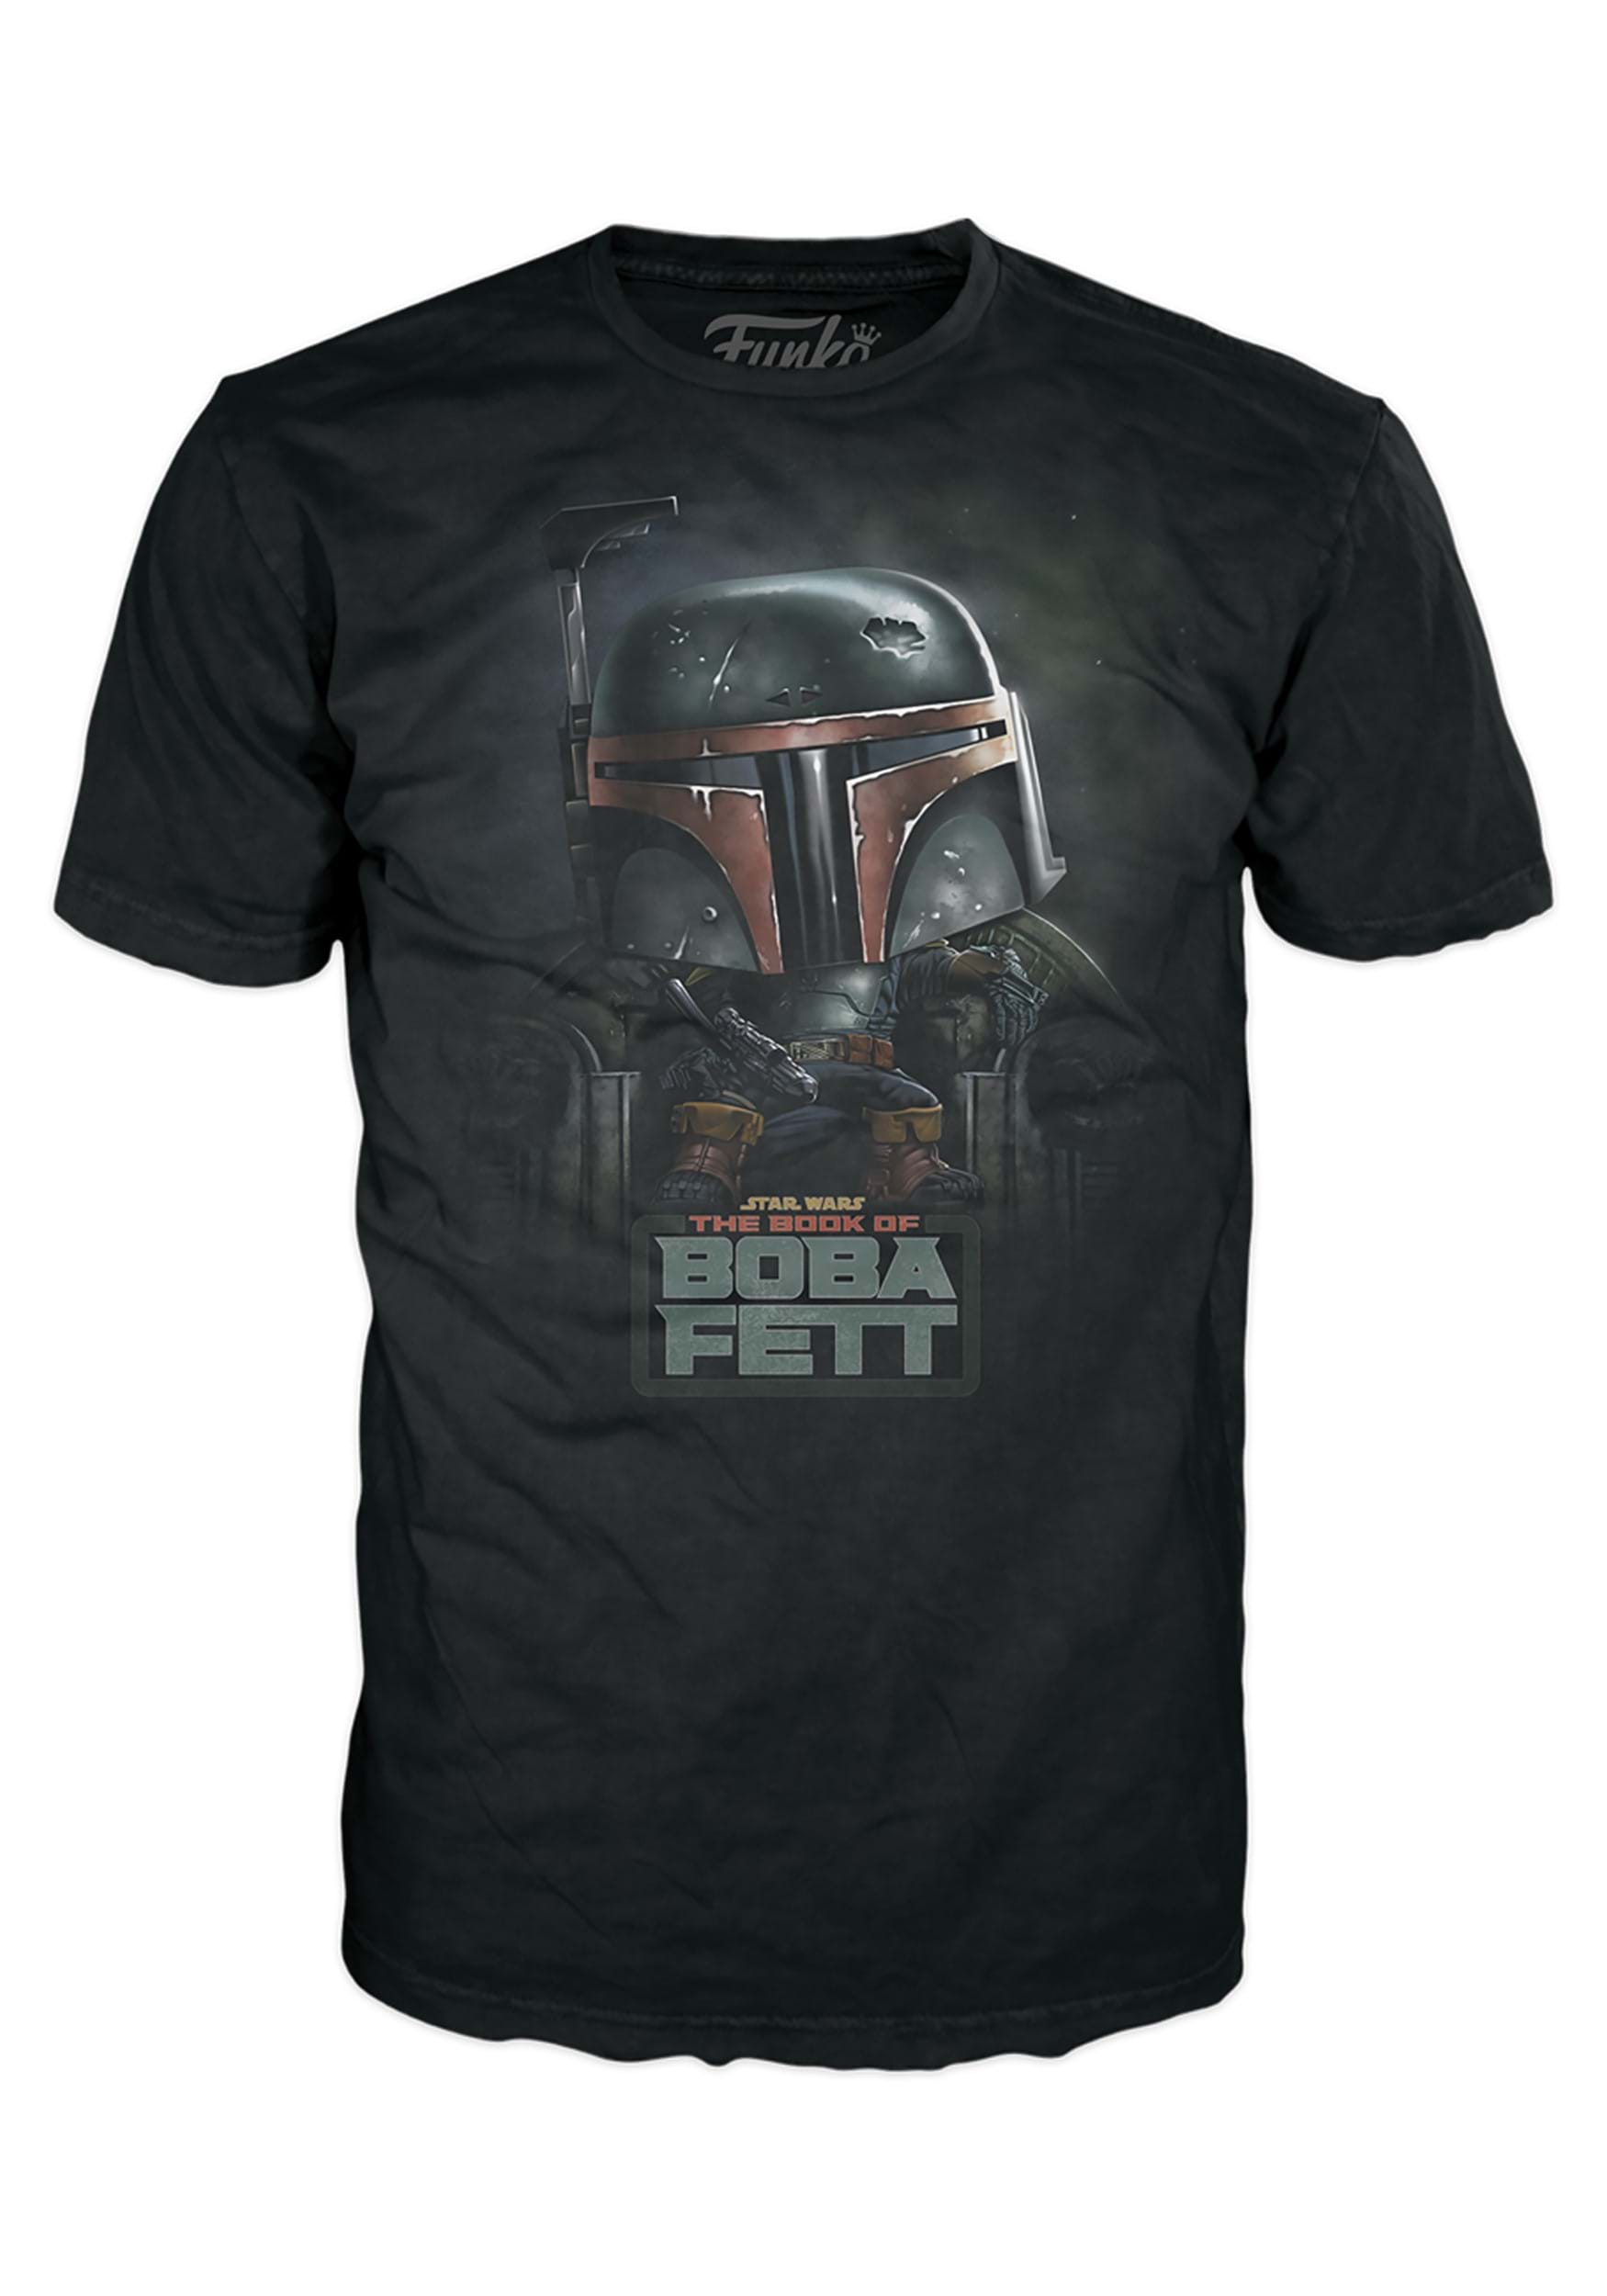 Boxed Tee: Star Wars- Book of Boba Fett Graphic T-Shirt